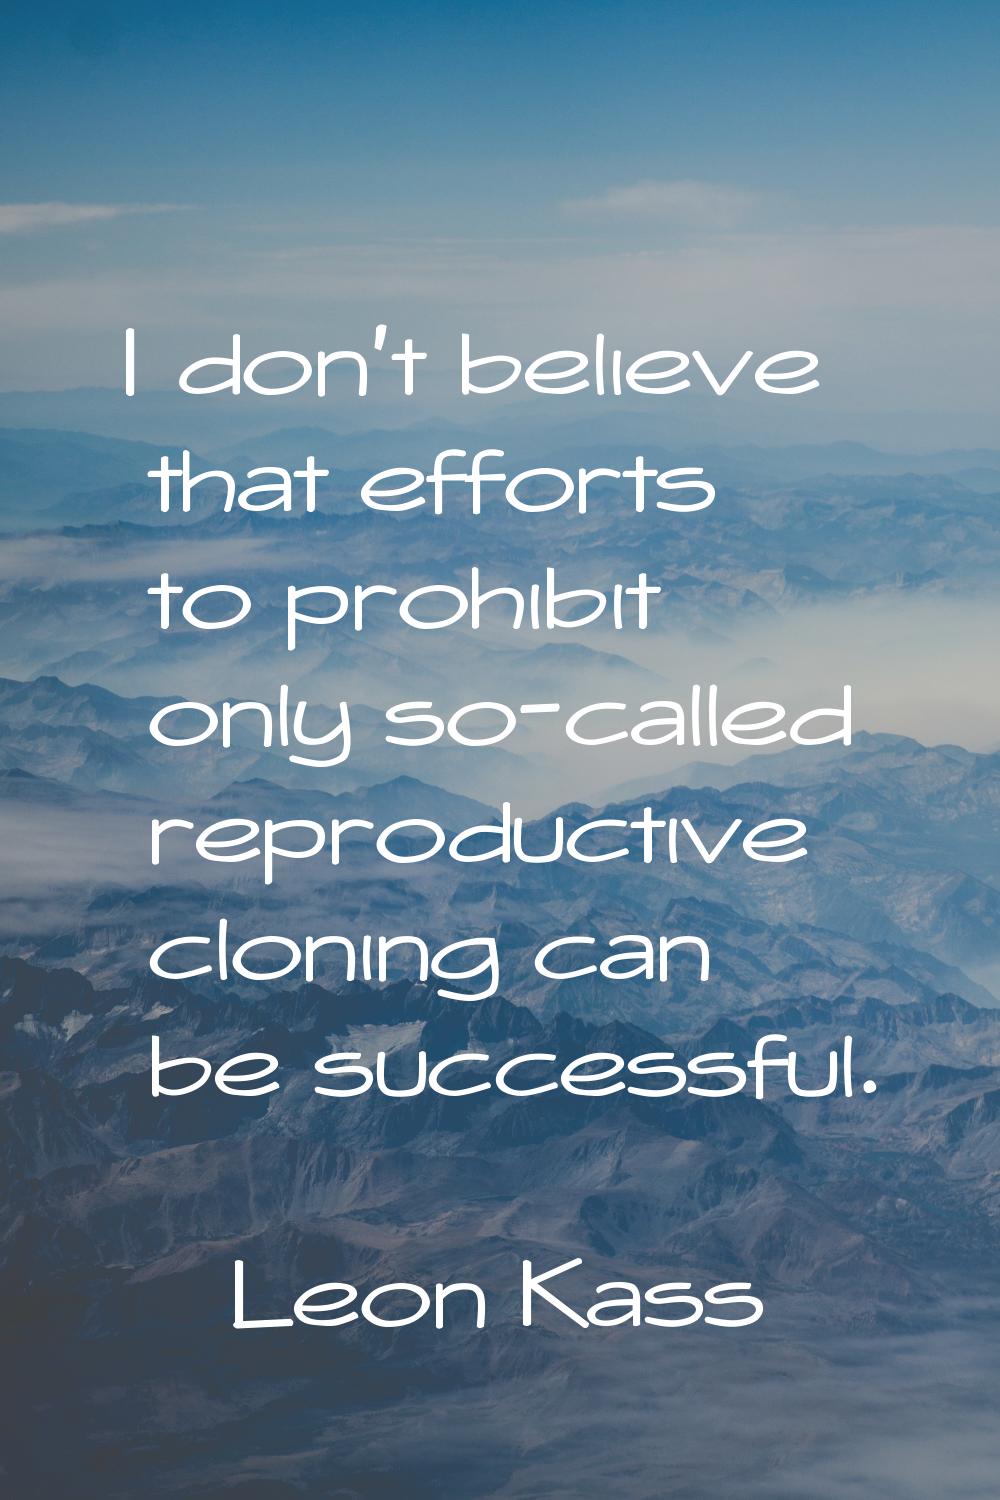 I don't believe that efforts to prohibit only so-called reproductive cloning can be successful.